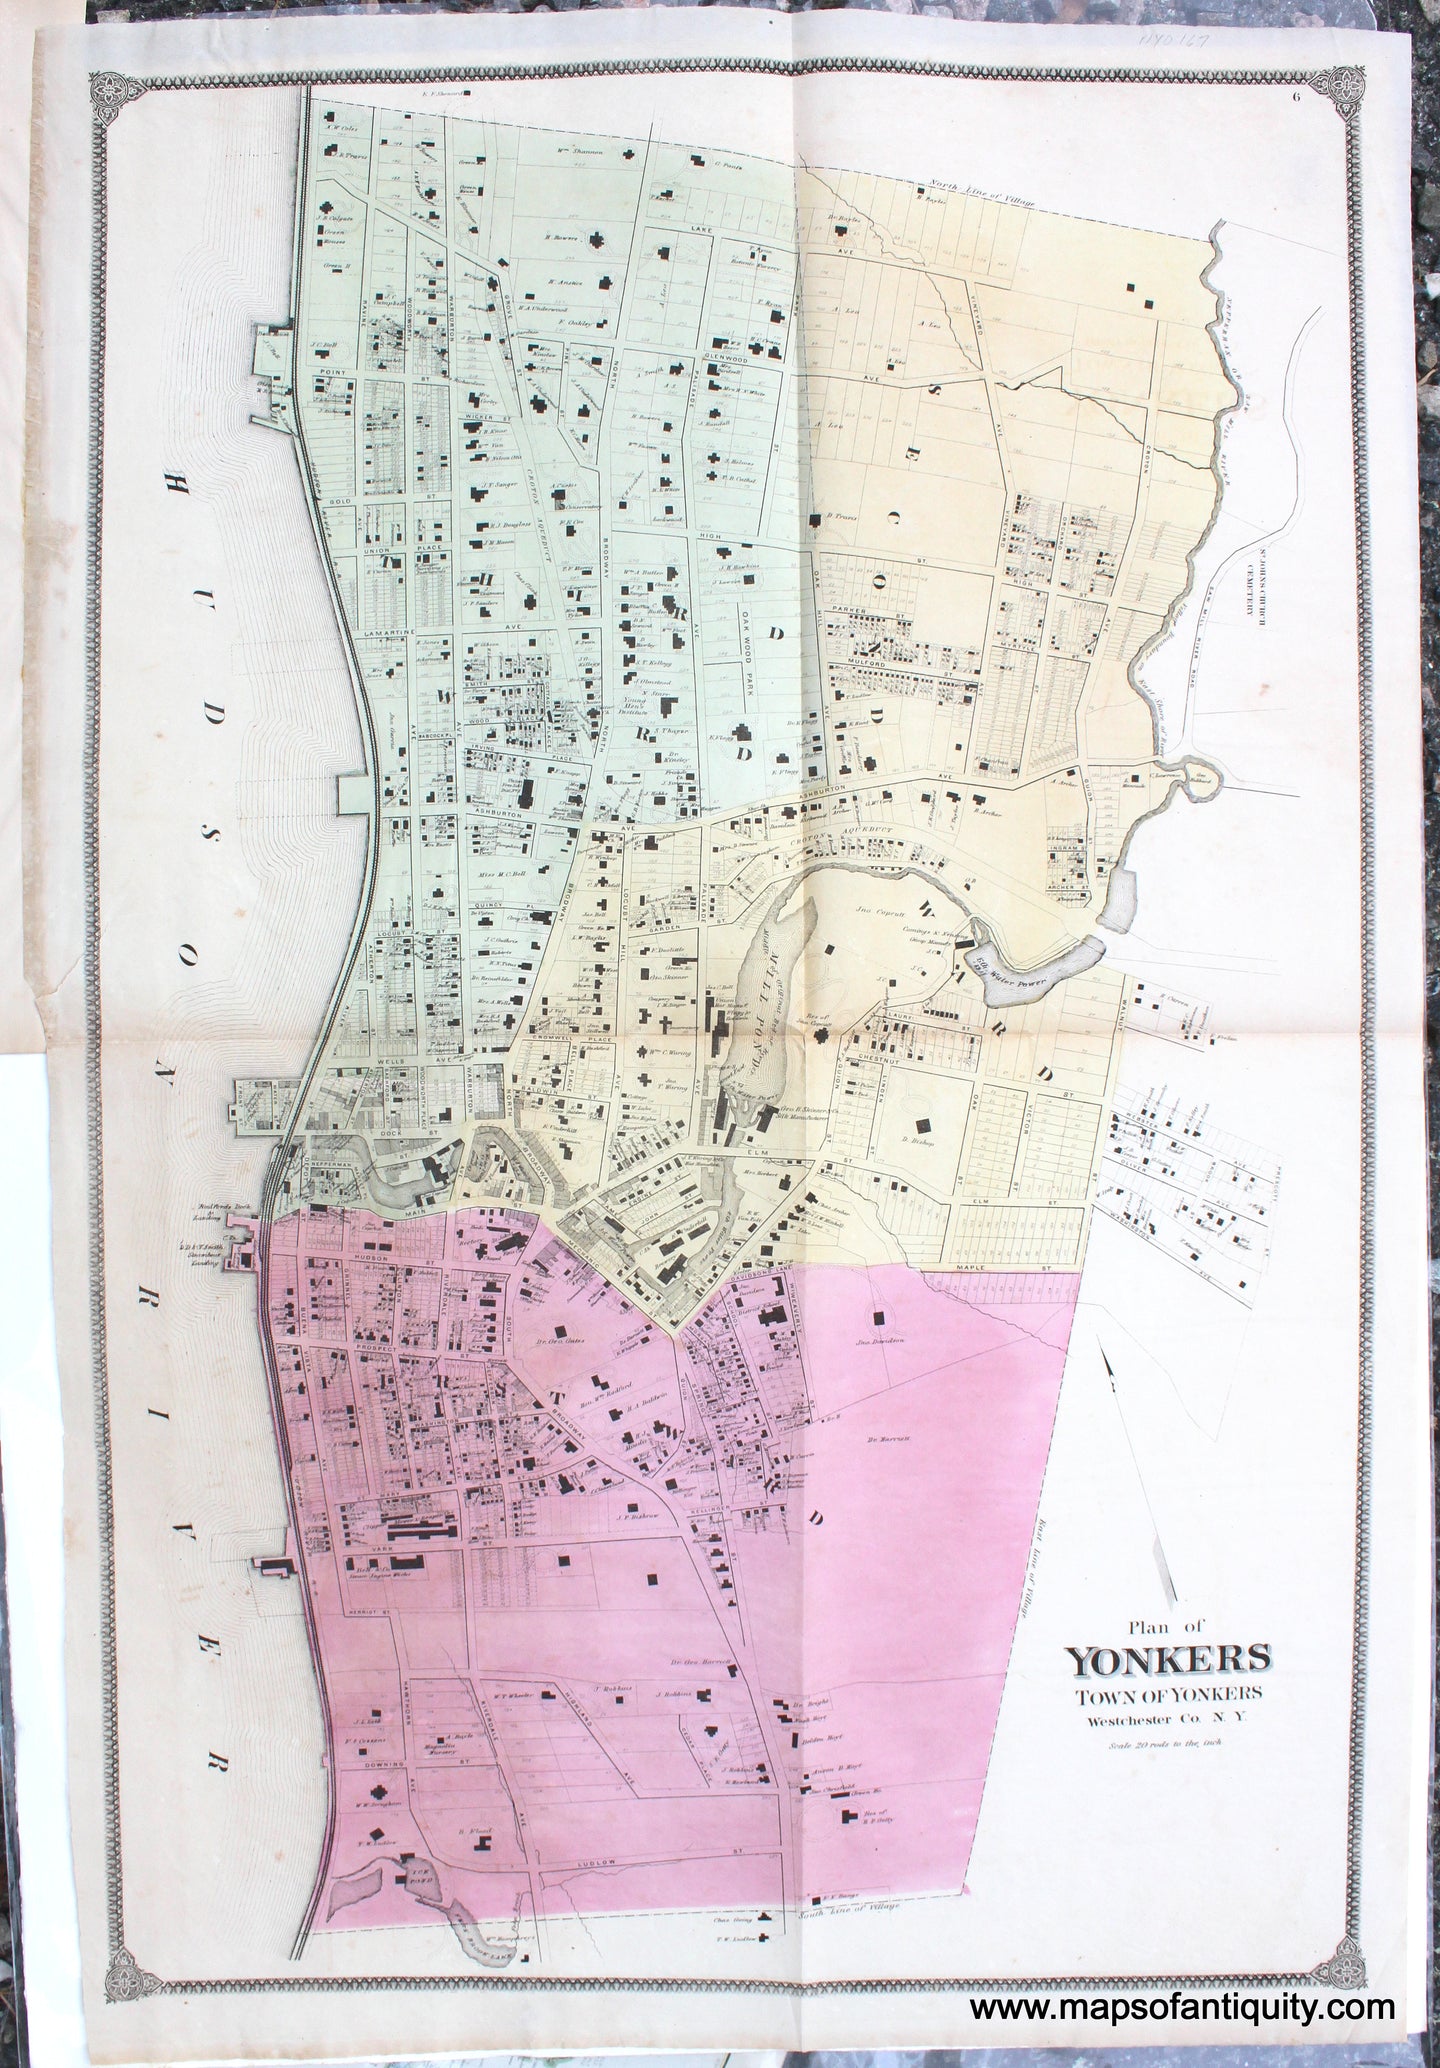 Antique-Map-Plan-of-Yonkers-Town-of-Yonkers-Westchester-Co.-N.Y.-New-York-1867